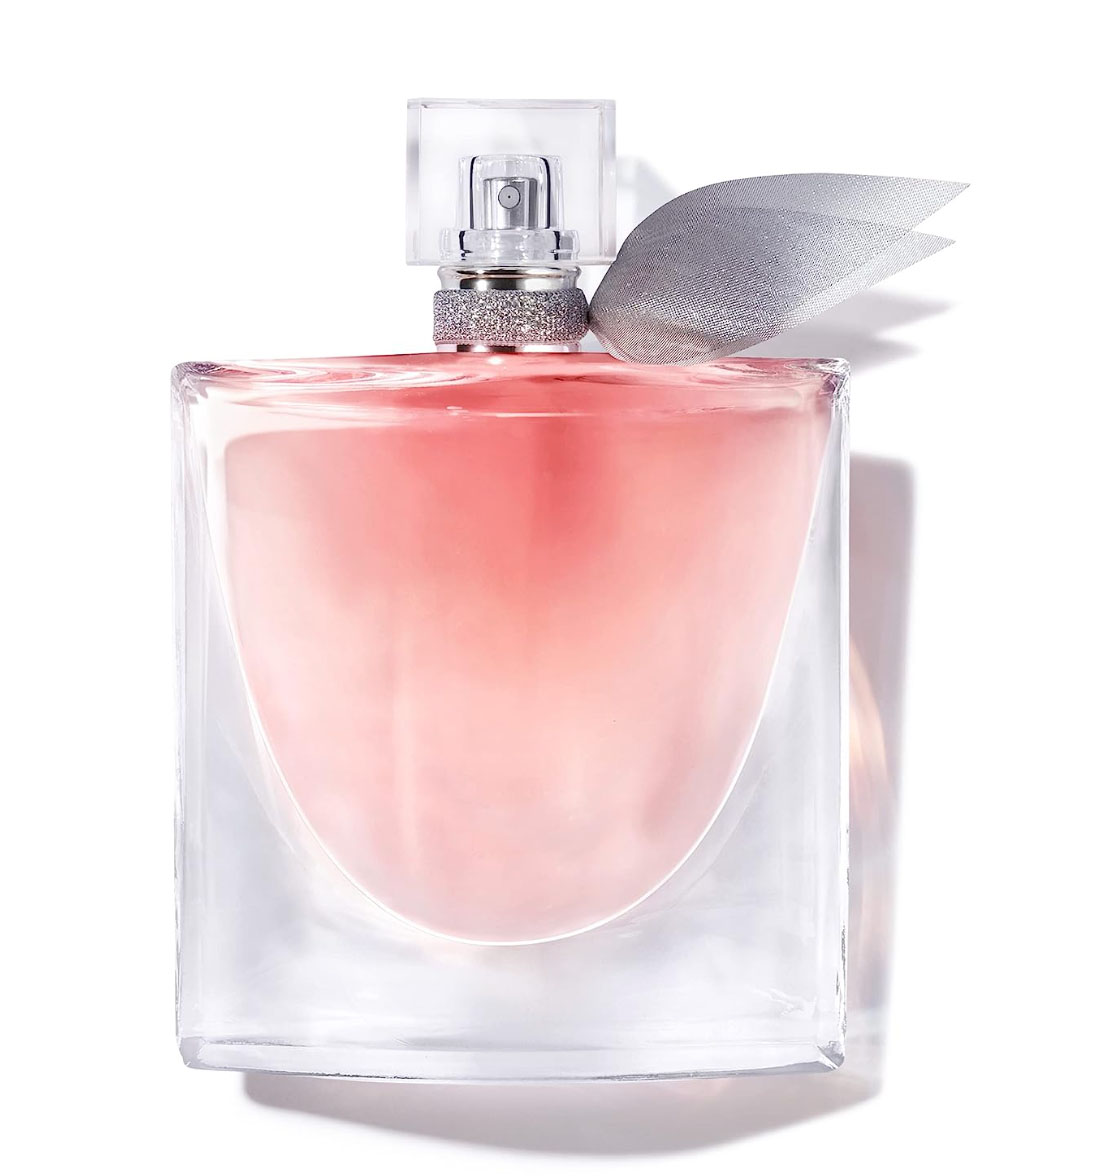 Lancome perfume in pink bottle